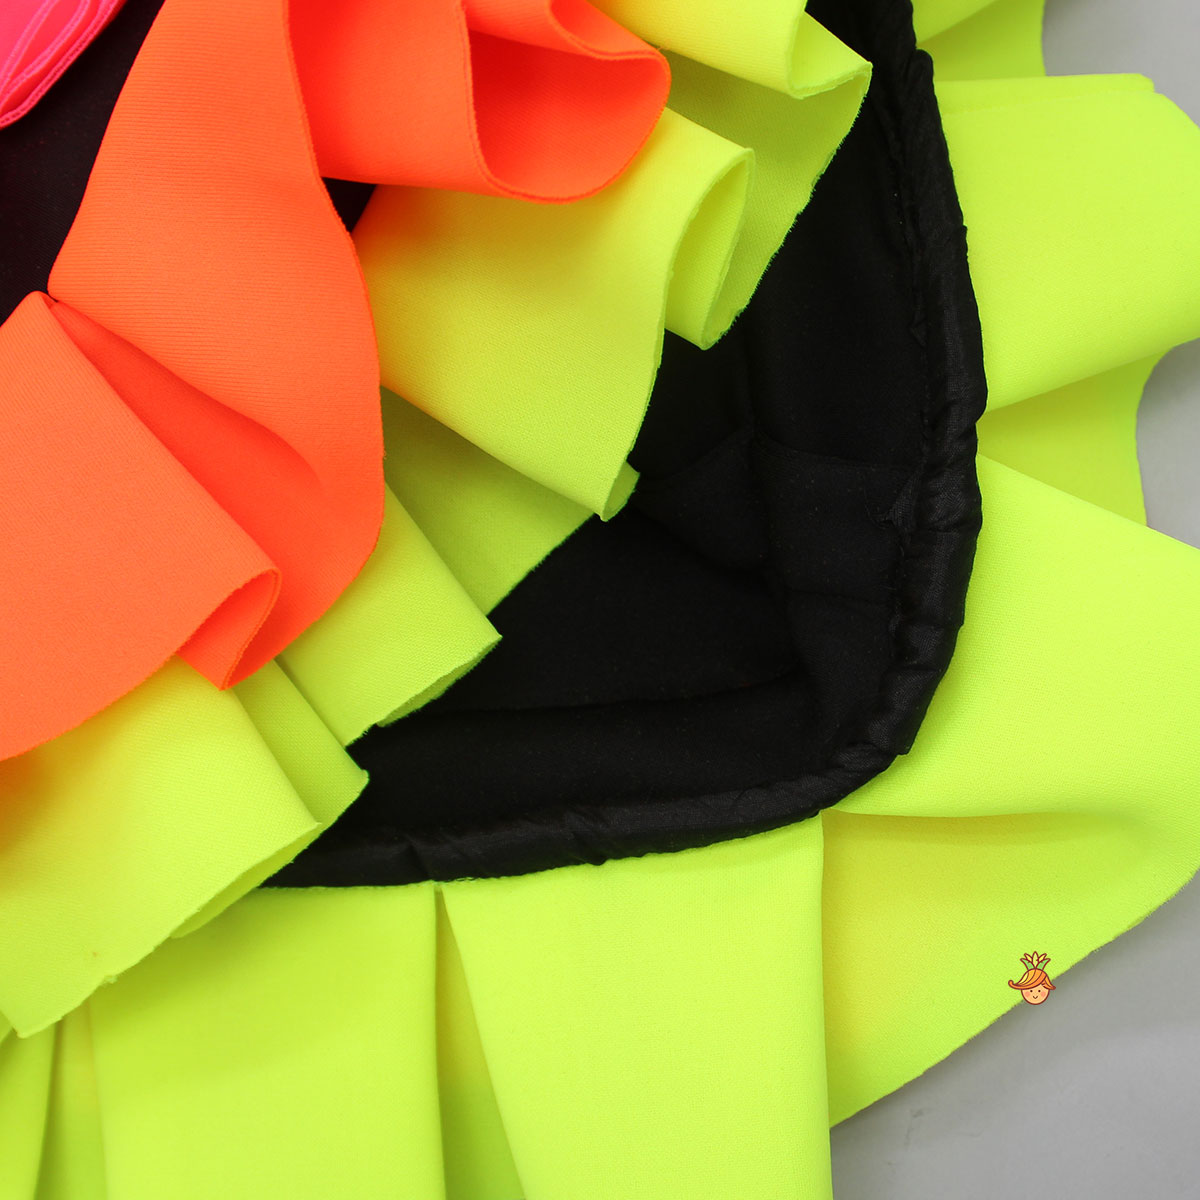 Pre Order: Neon Frilly Dress With Matching Hair Band